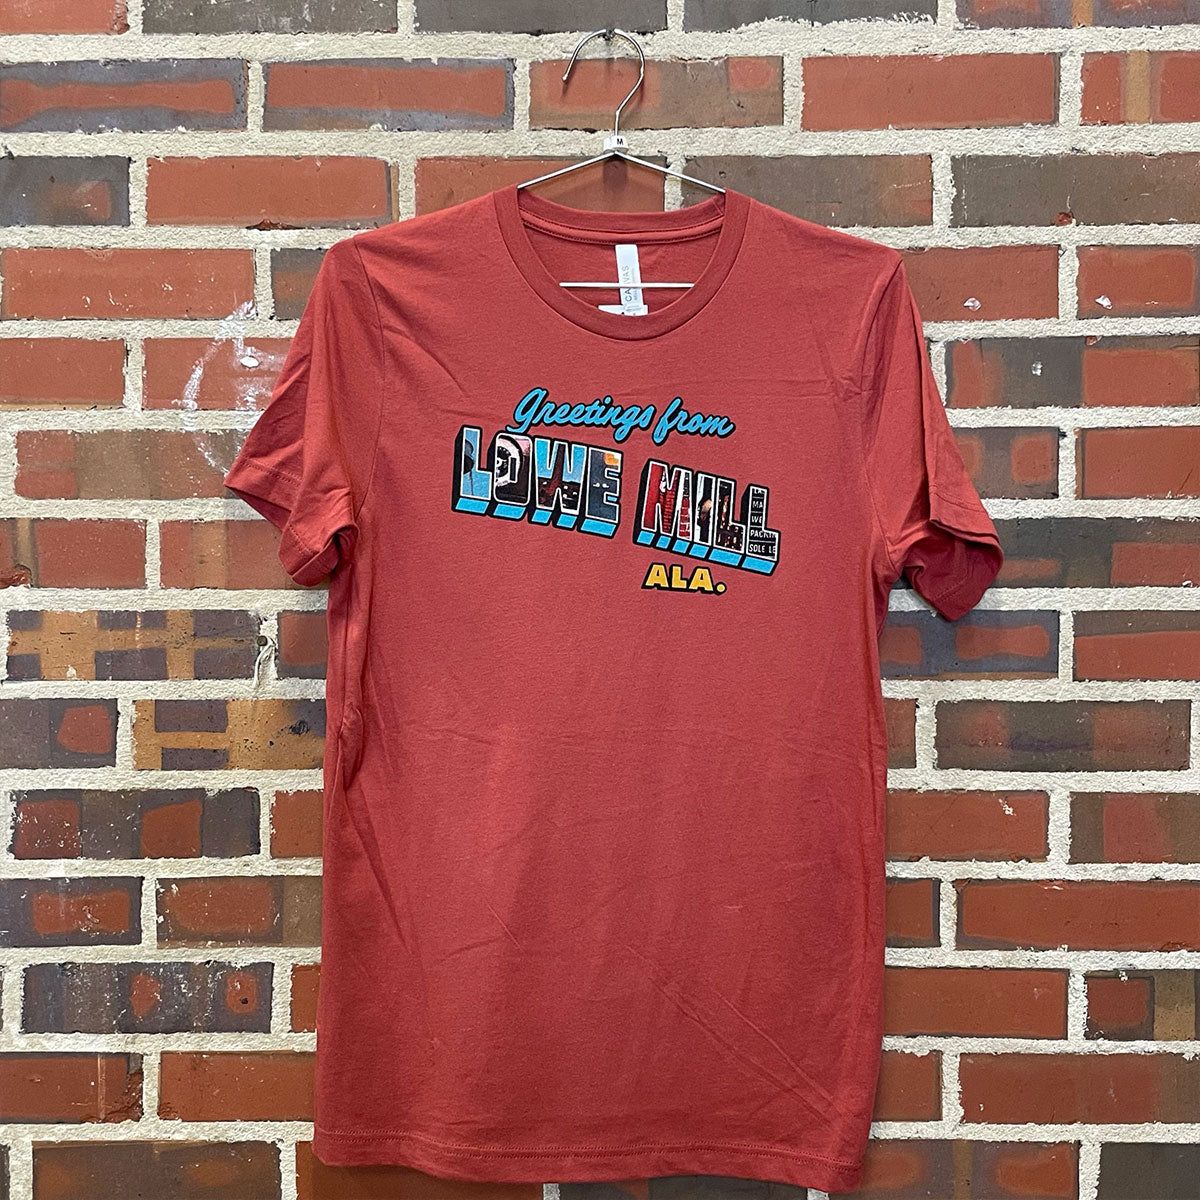 Image of Greetings from Lowe Mill design on red t-shirt hanging against brick wall at Lowe Mill